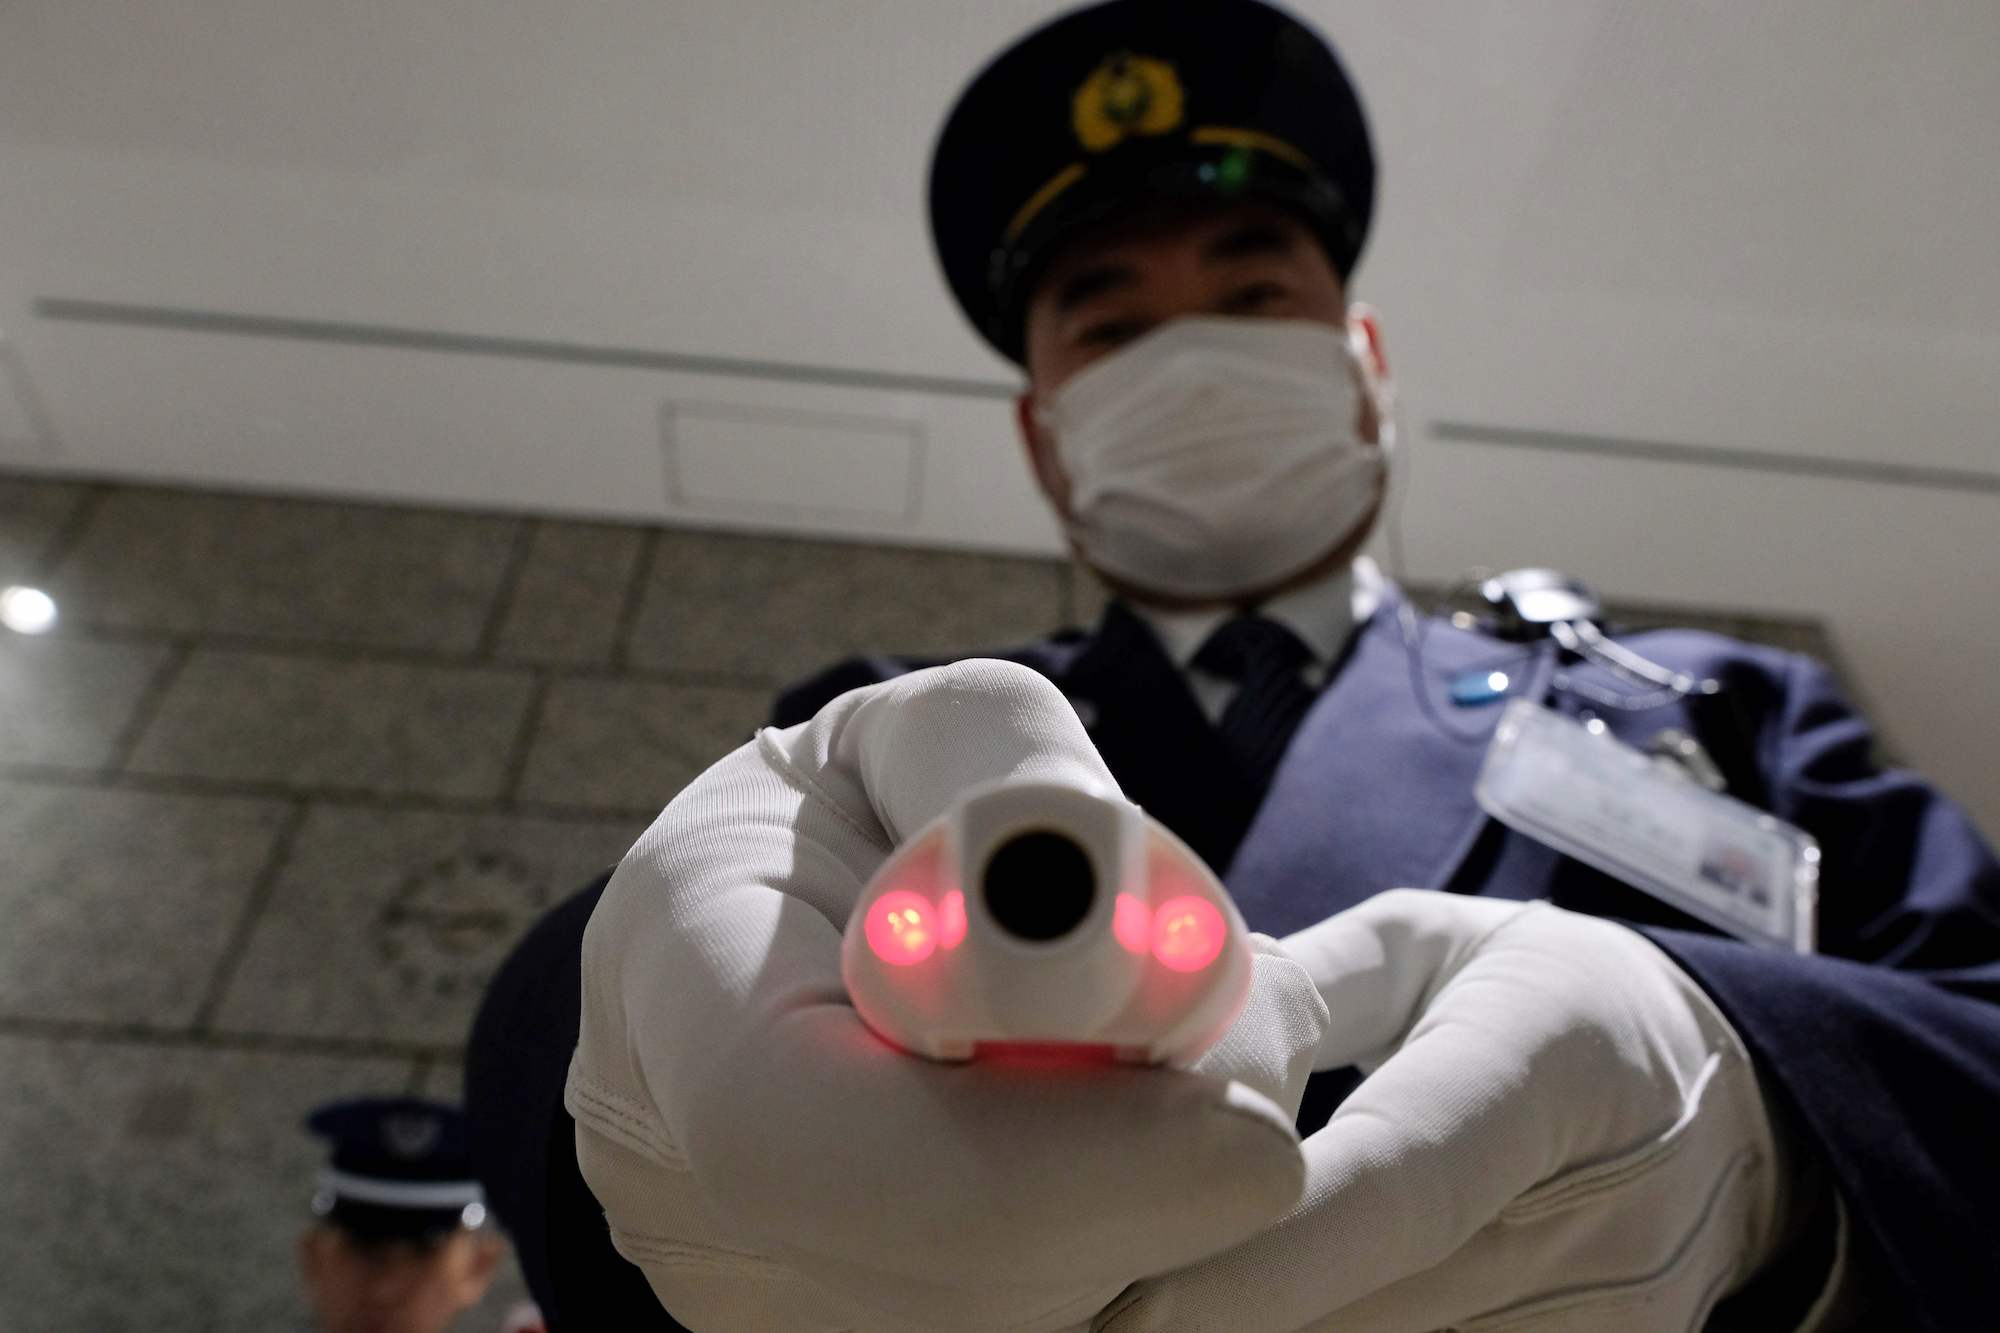 A security guard shows a body temperature-measuring device at the reception of the Tokyo Metropolitan Government office in Tokyo on Thursday. Japan will quarantine all passengers arriving from China and South Korea, the country's prime minister said on March 5. | AFP-JIJI